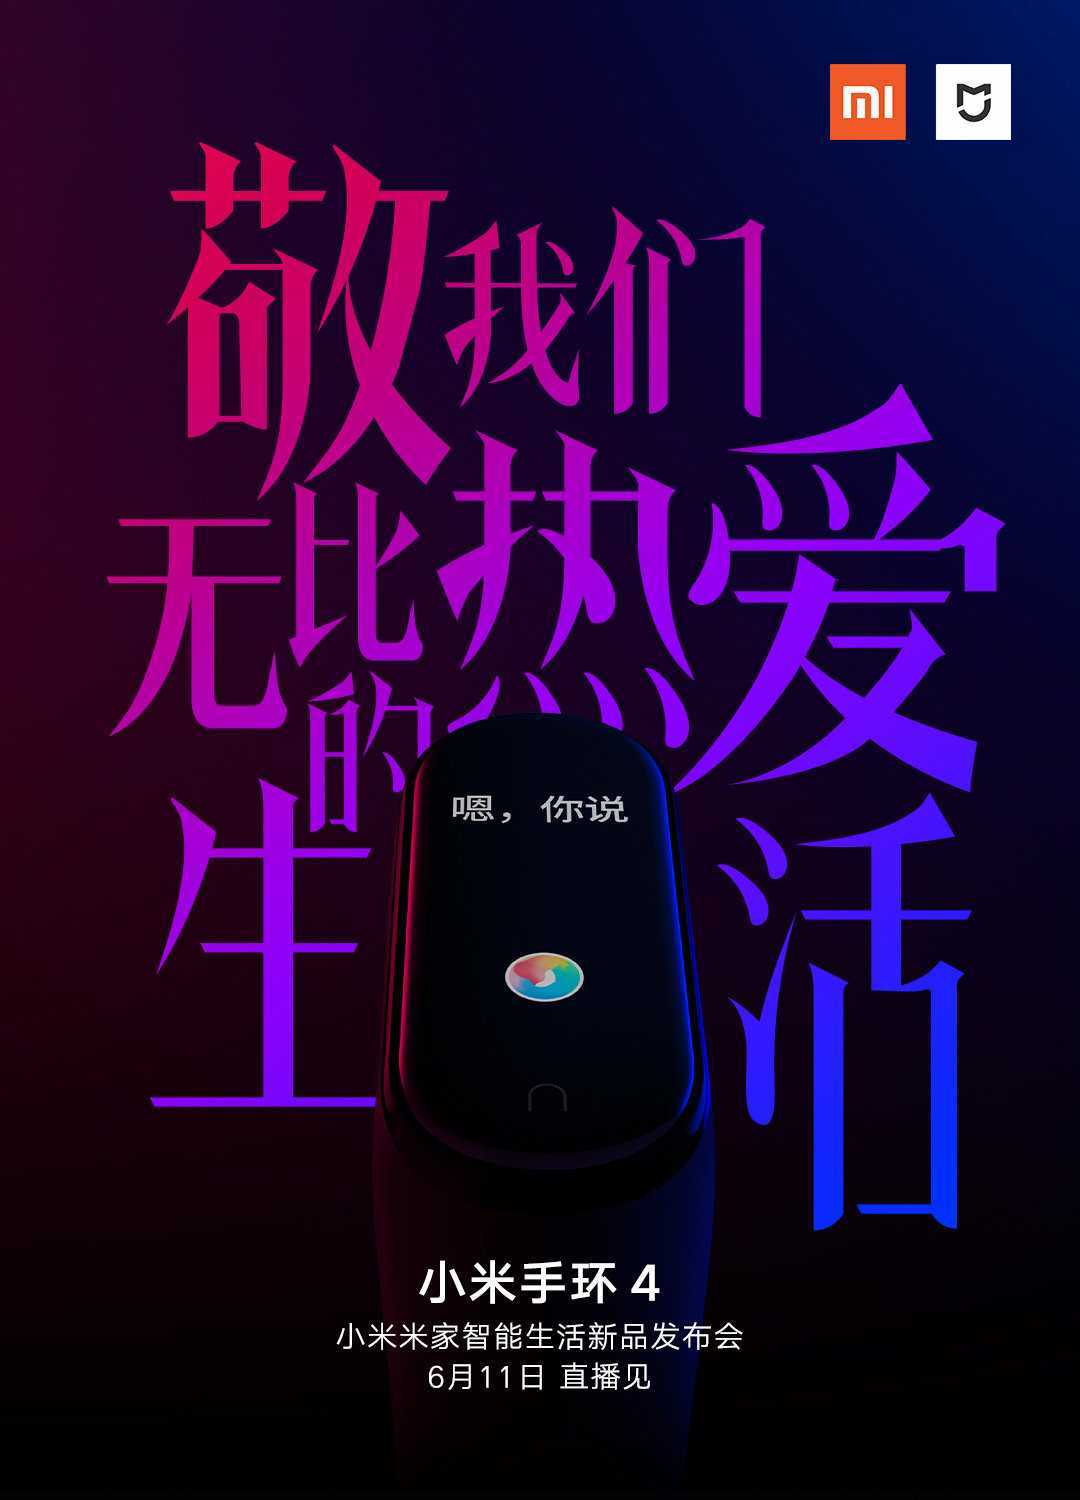 Poster shows the new color screen for the Mi Band 4 and the June 11th unveiling date - The sequel to one of the most popular wearables will be unveiled next week